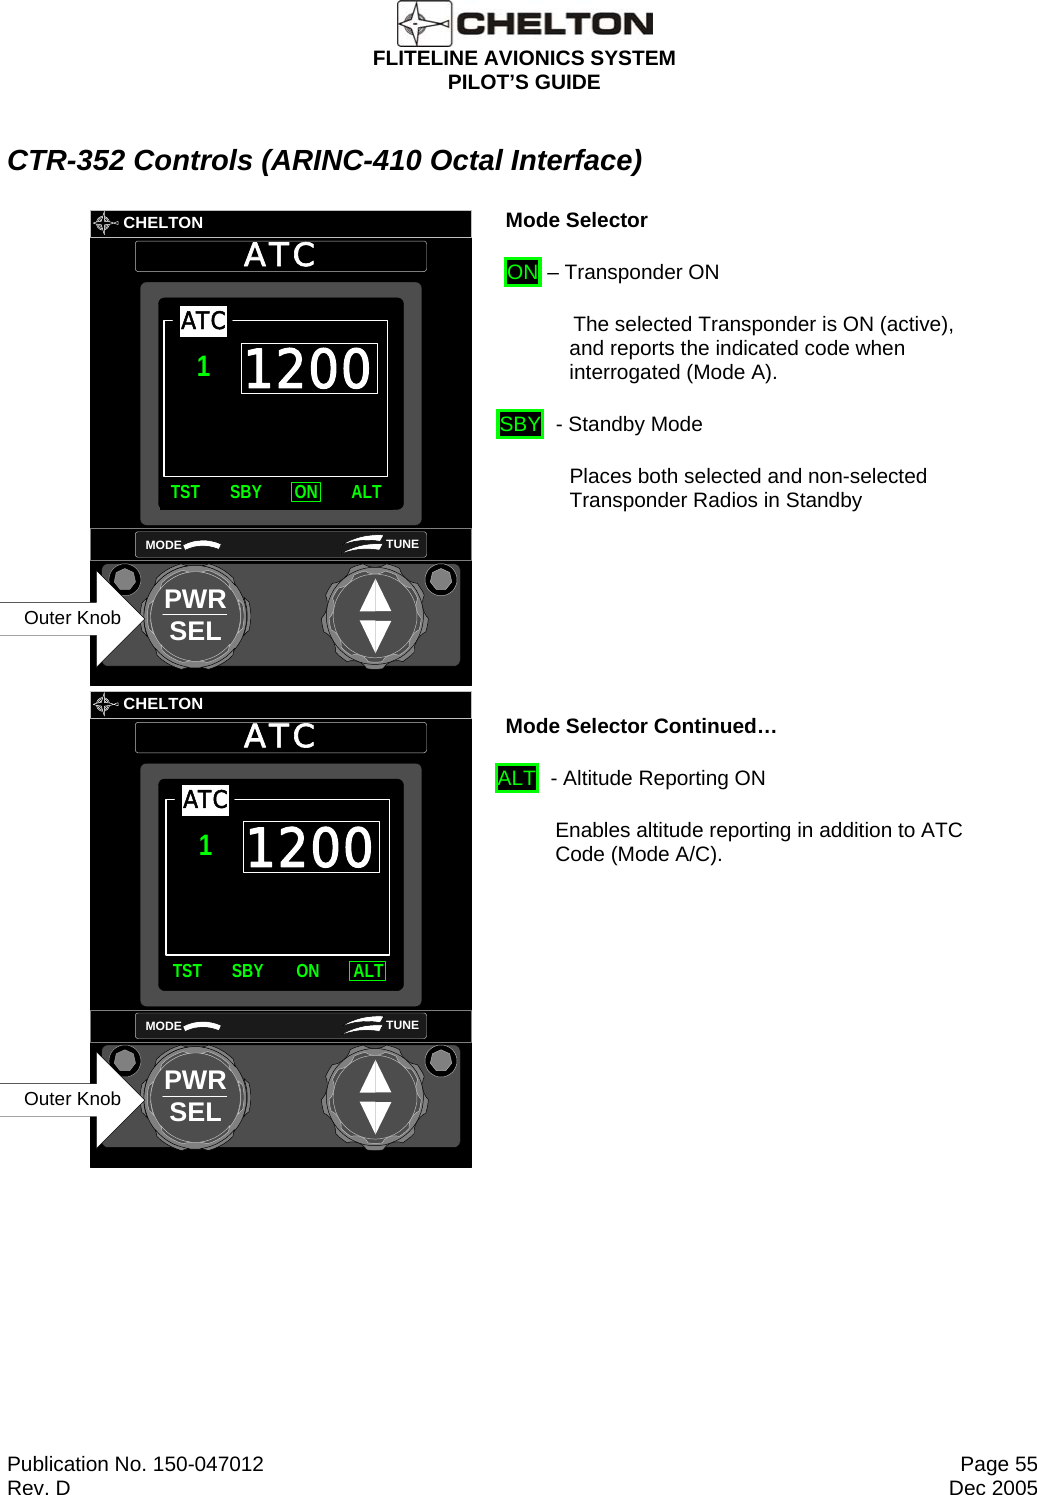  FLITELINE AVIONICS SYSTEM PILOT’S GUIDE  Publication No. 150-047012  Page 55 Rev. D  Dec 2005 CTR-352 Controls (ARINC-410 Octal Interface)       CHELTONATCPWRSELMODE TUNE1200TST SBY ON ALTATC1Outer Knob Mode Selector  ON – Transponder ON              The selected Transponder is ON (active),  and reports the indicated code when interrogated (Mode A). SBY  - Standby Mode Places both selected and non-selected Transponder Radios in Standby        CHELTONATCPWRSELMODE TUNE1200TST SBY ON ALTATC1Outer Knob Mode Selector Continued… ALT  - Altitude Reporting ON  Enables altitude reporting in addition to ATC Code (Mode A/C).  